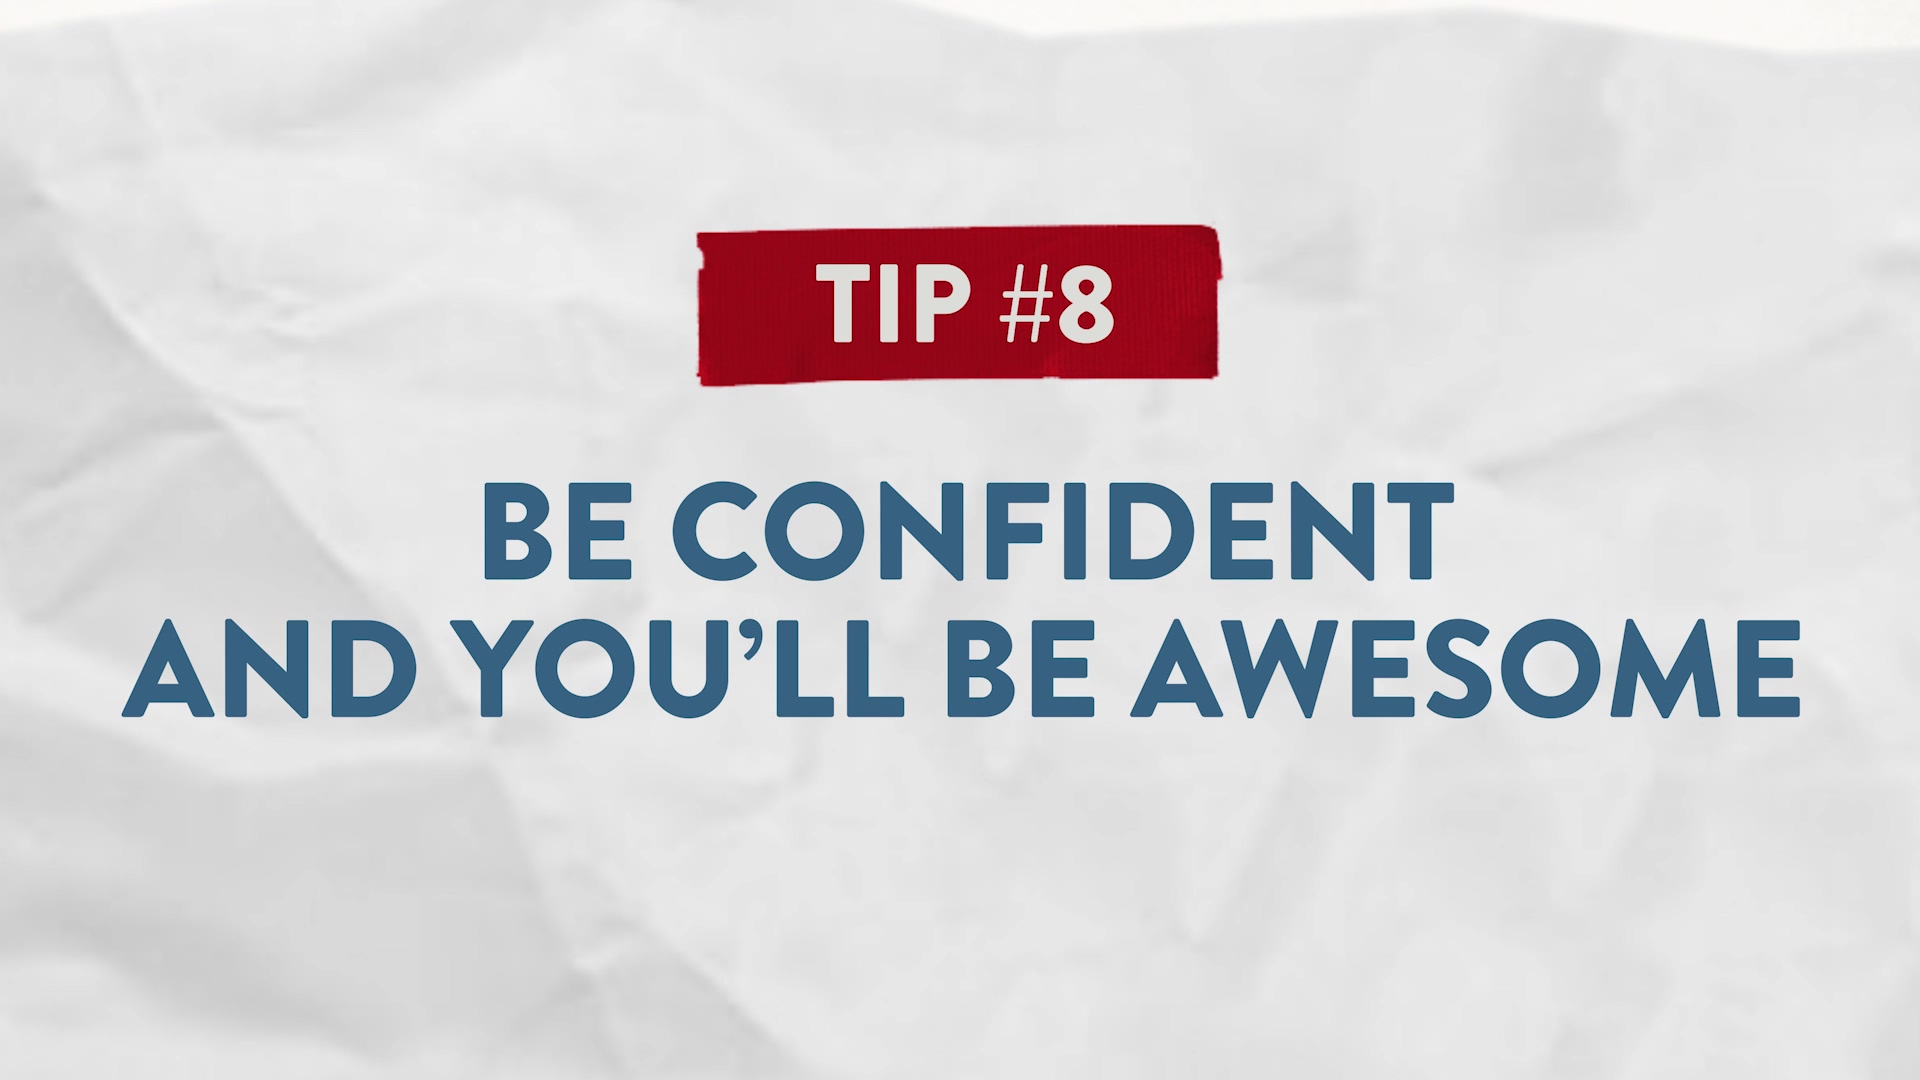 Tip #8 Be Confident and Youll Be Awesome